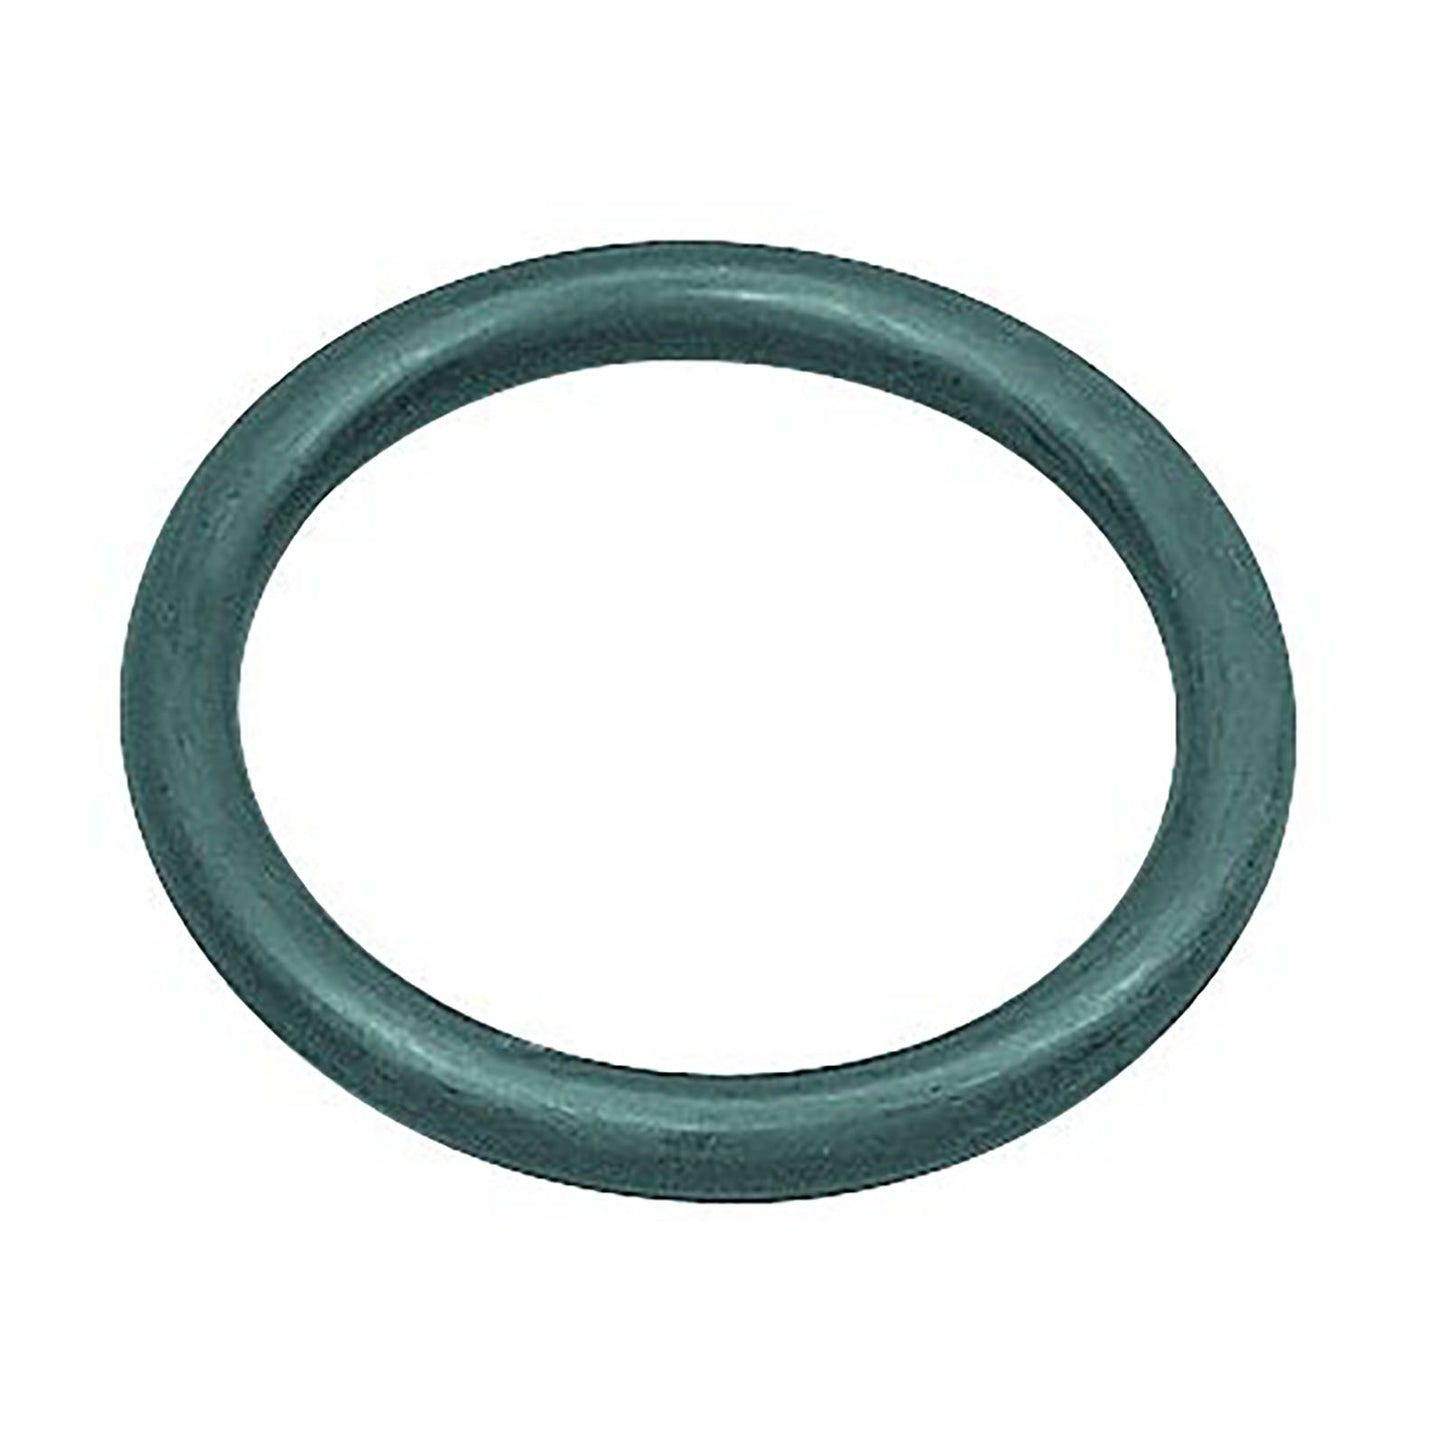 GEDORE KB 3770 - Safety Ring 1.1/2" (6676760)